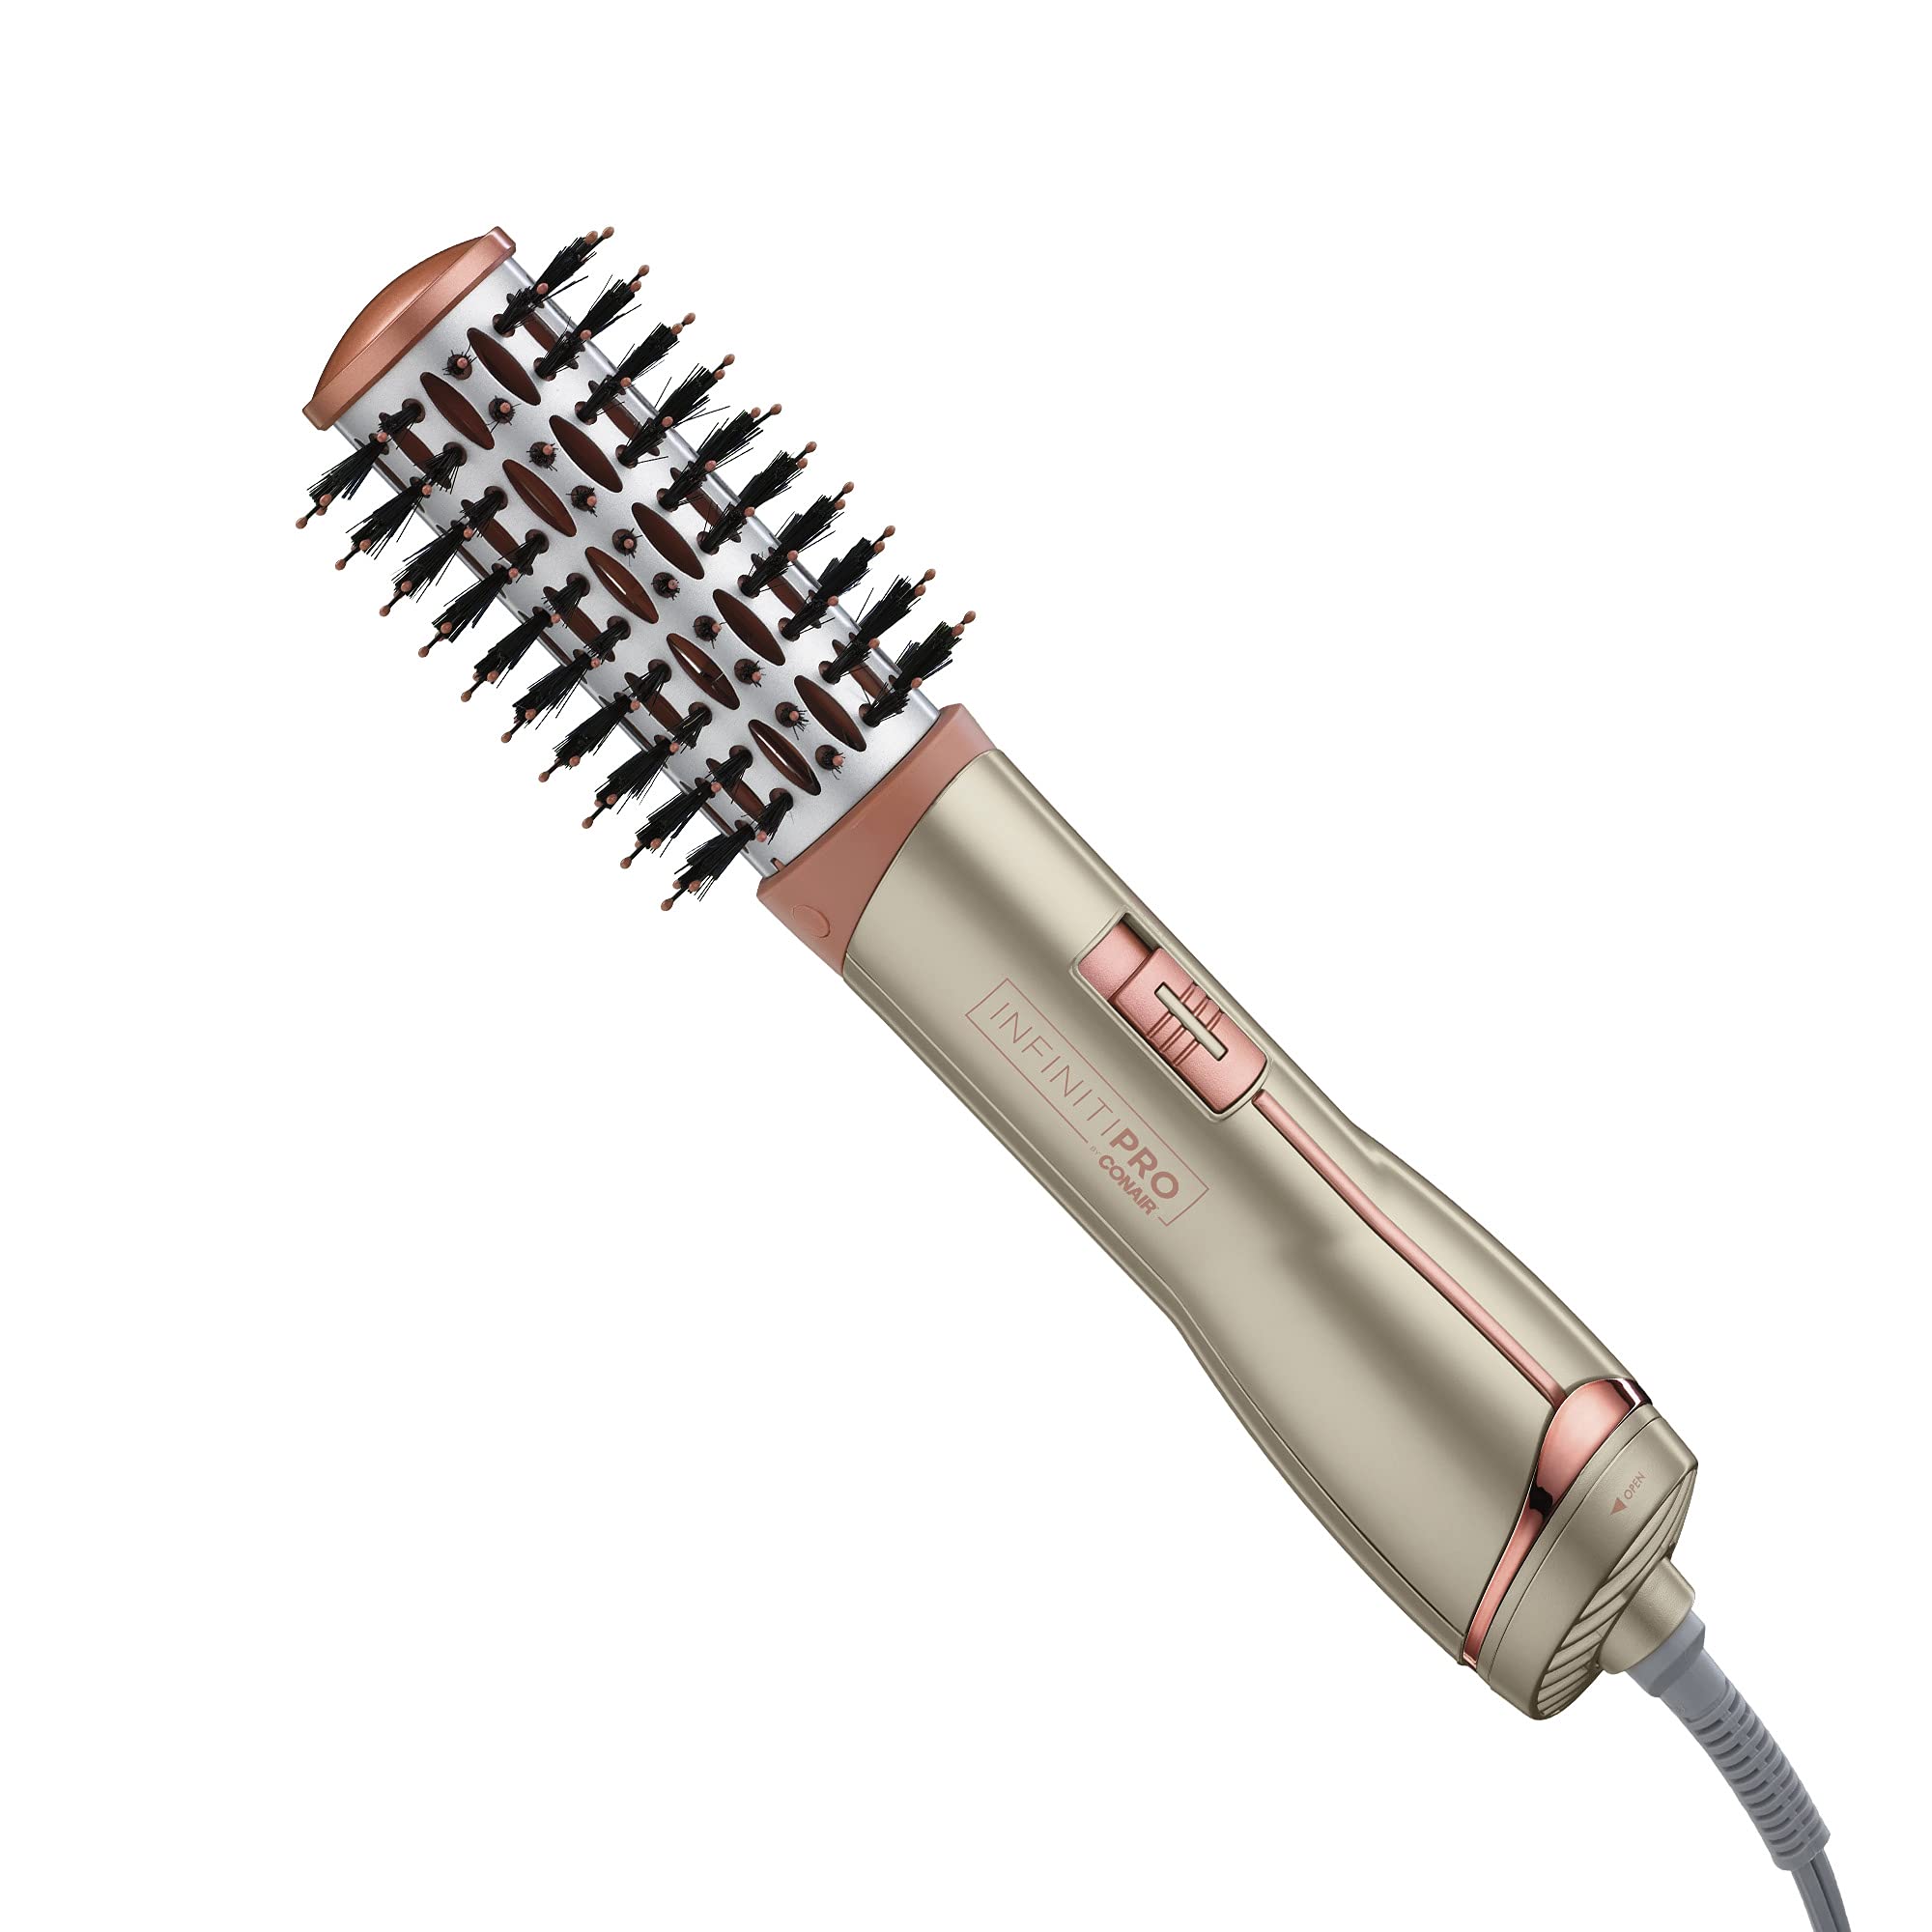 INFINITIPRO BY CONAIR Frizz Free 1 1/2-inch Hot Air Brush, Dryer Brush